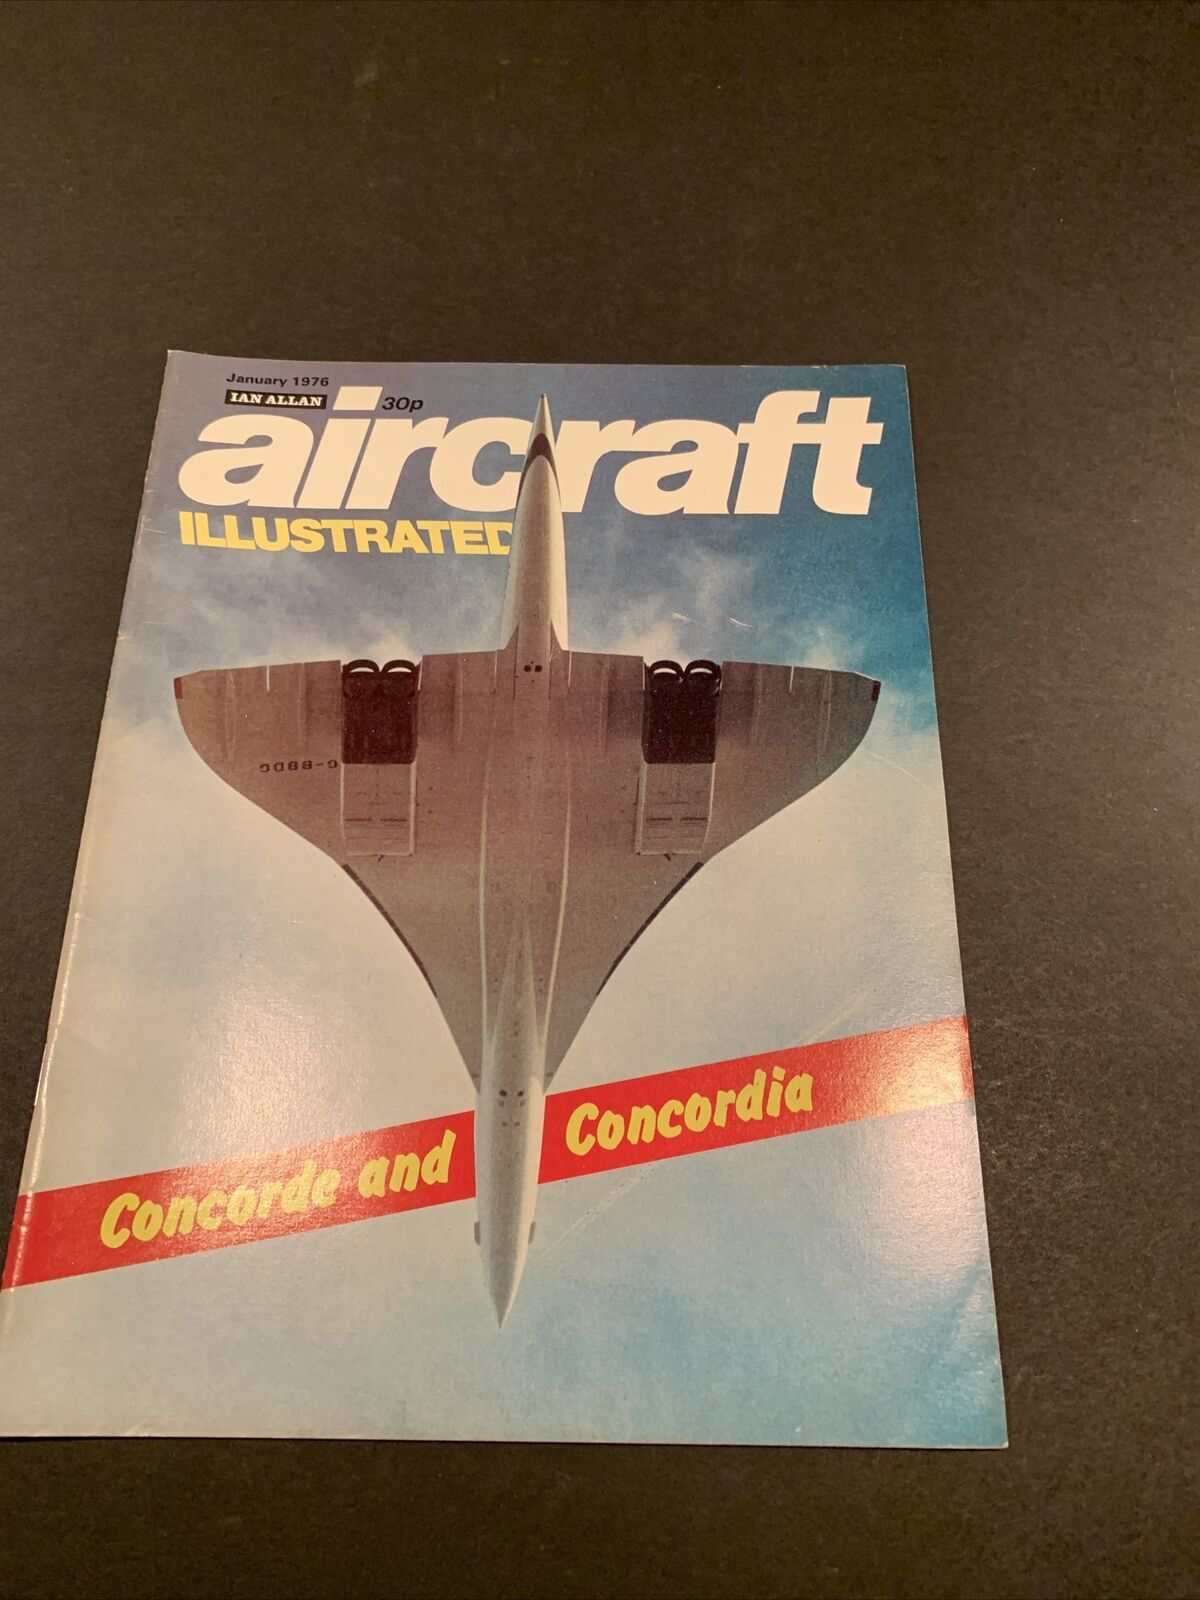 Aircraft Illustrated January 1976 Concorde and Concordia Ian Allan